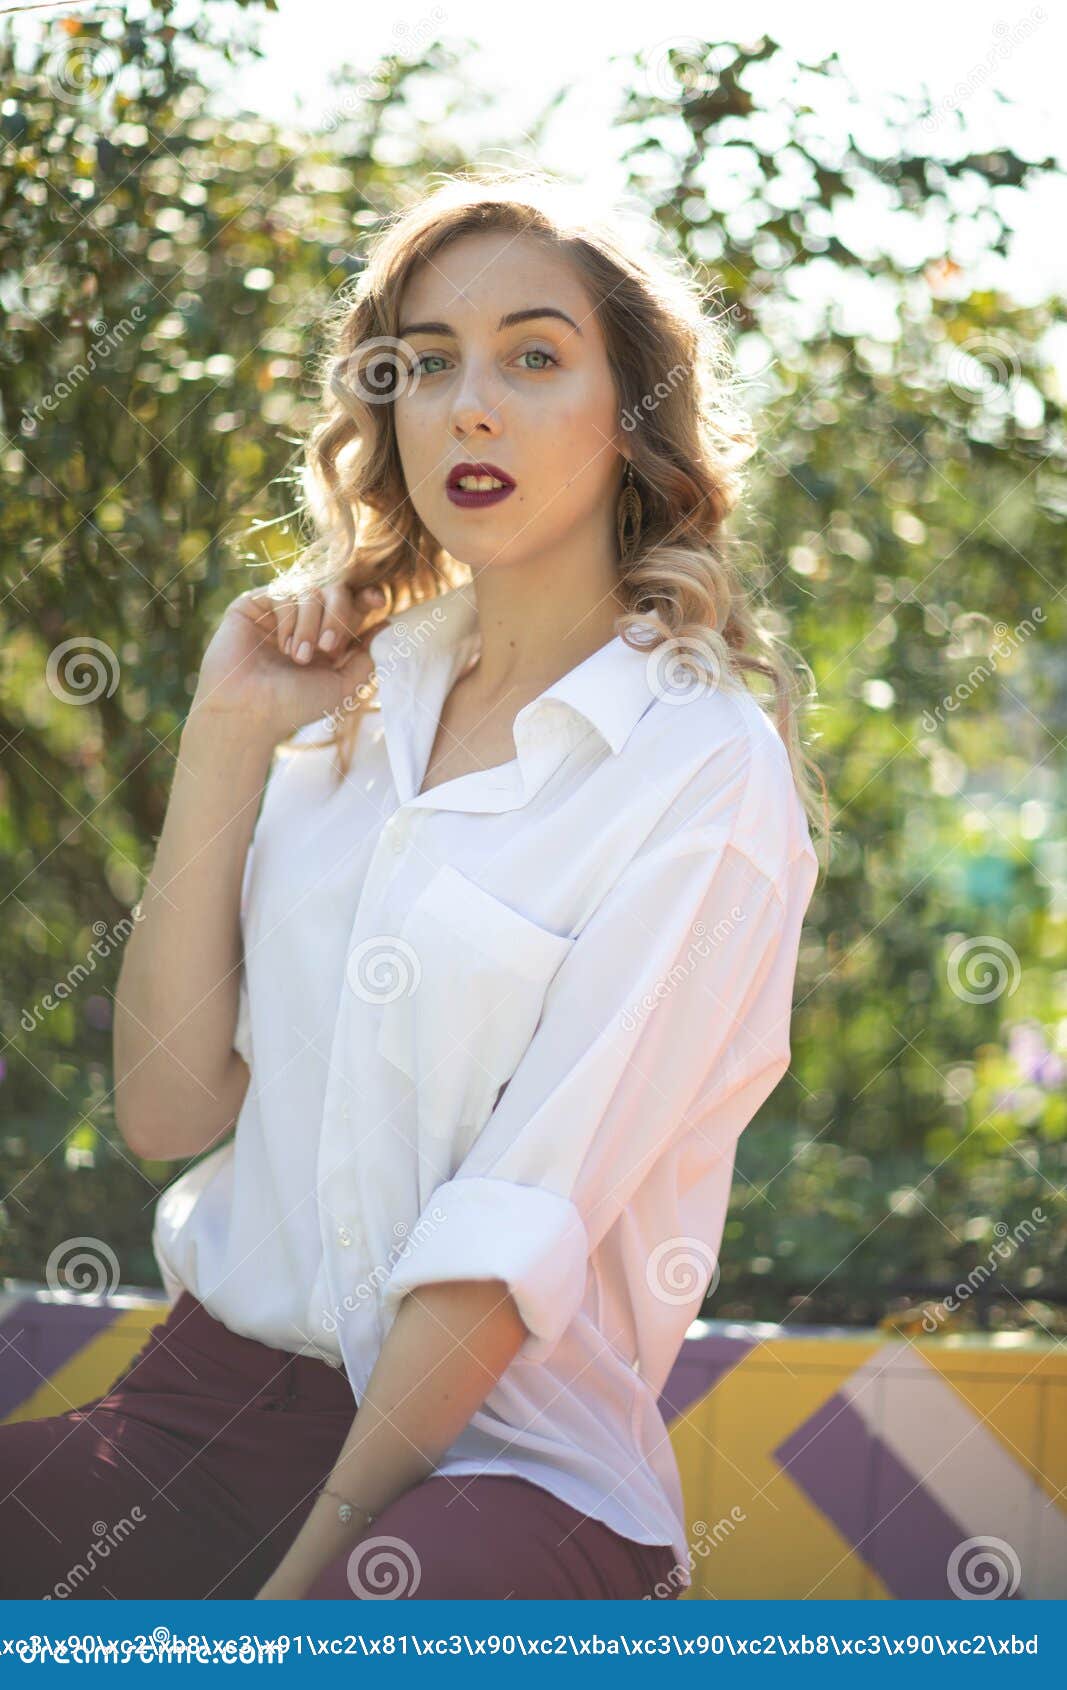 Street Photo Shoot with a Wonderful Girl. Stock Image - Image of ...